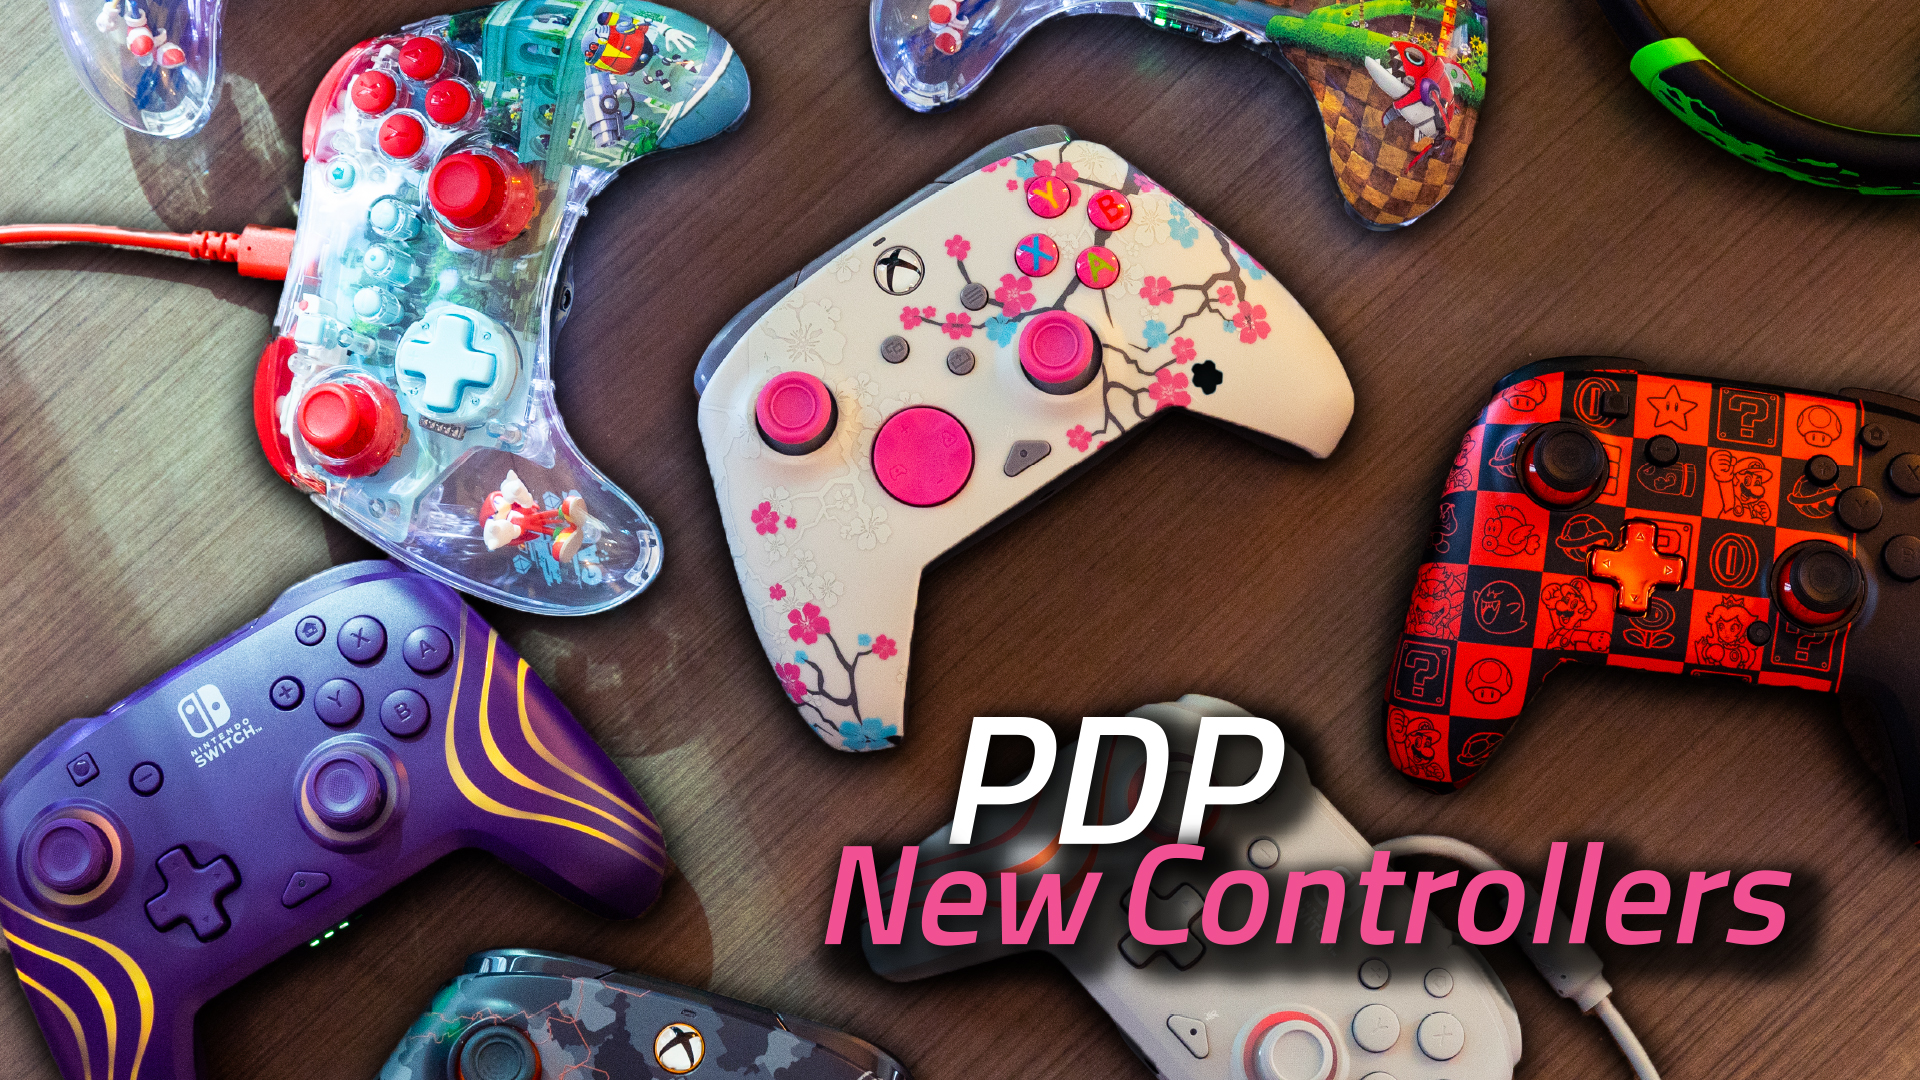 New RGB Afterglow, REMATCH, and REALMZ Controllers by PDP – A Vibrant Pre-Holiday Launch